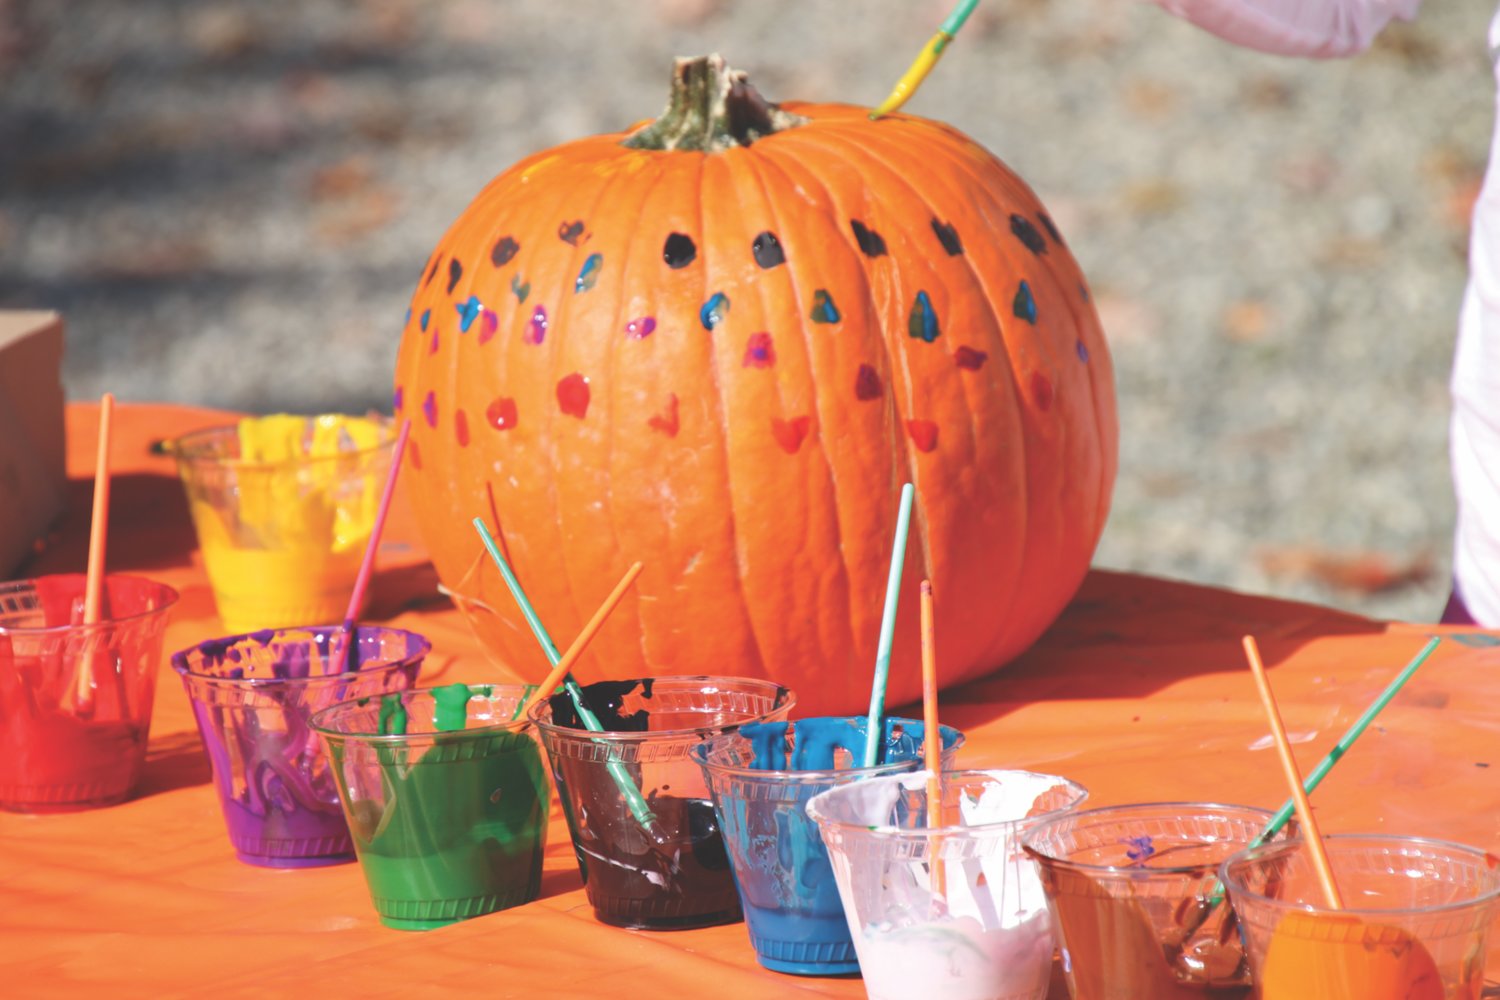 Jervis Public Library, 613 N. Washington St., will host a Pumpkin Painting workshop at 6 p.m. on Wednesday, Oct. 19.